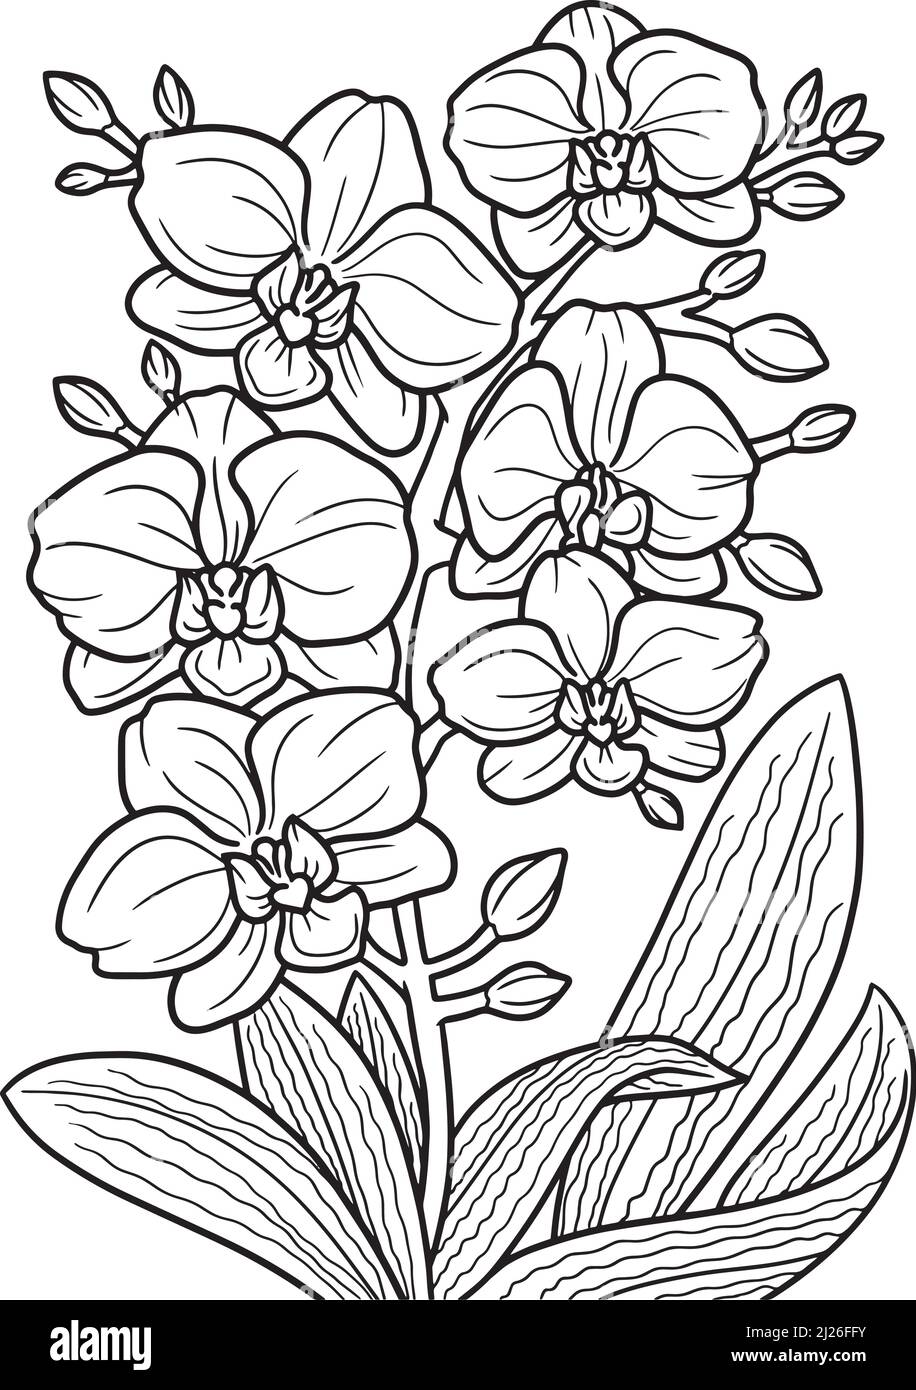 Orchid Flower Coloring Page for Adults Stock Vector